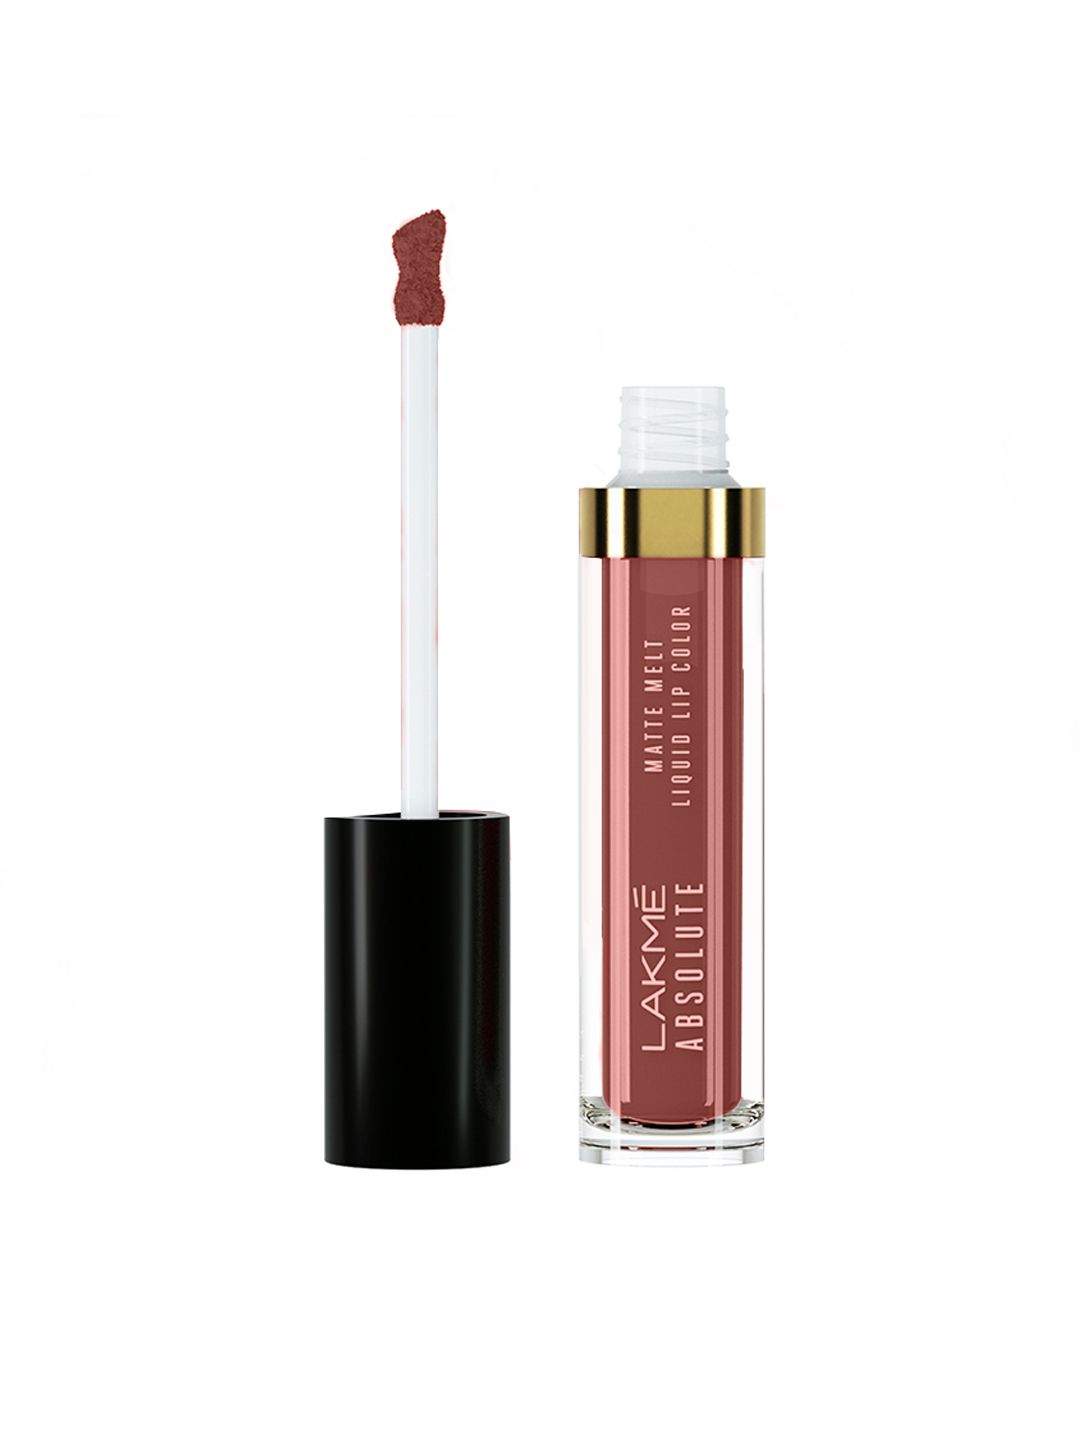 Lakme Absolute Matte Melt Liquid Lip Color - 336 Brown Tan Price in India